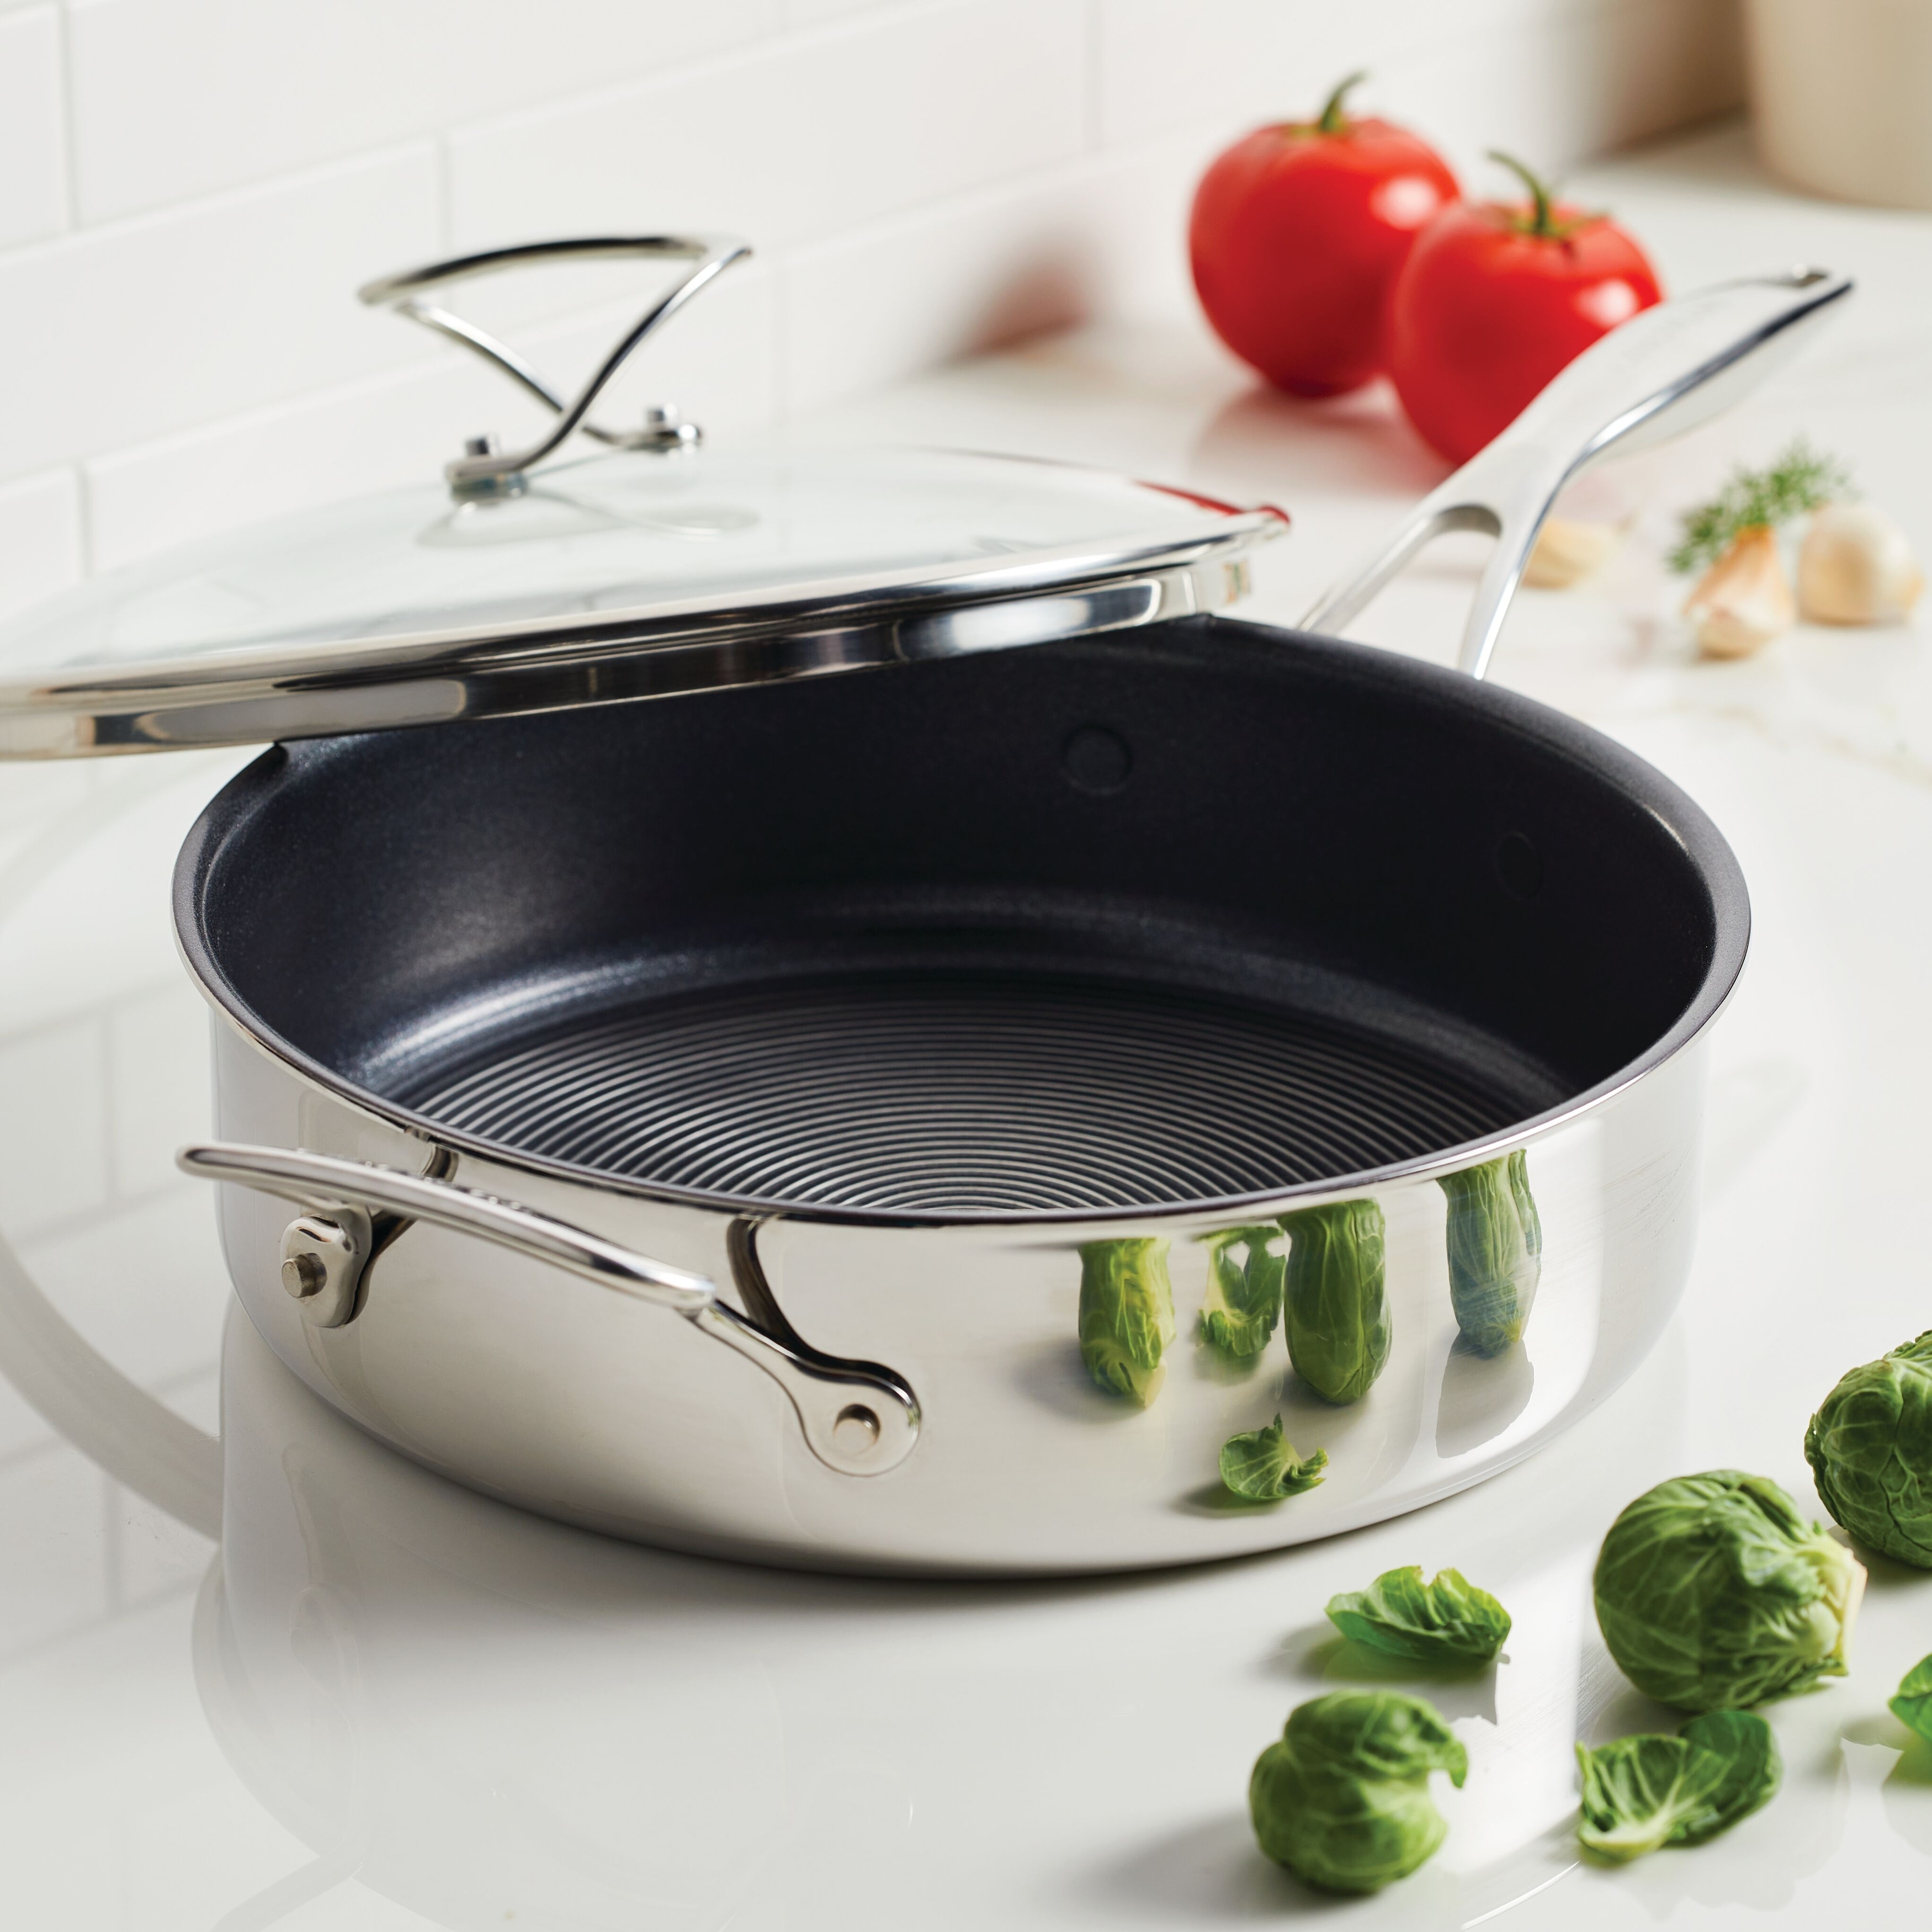 https://ak1.ostkcdn.com/images/products/is/images/direct/ab1a085ed8af9d8d0d4beb814978fa9b7aadd70e/Circulon-Clad-Stainless-Steel-Saut%C3%A9-Pan-with-Lid-and-Hybrid-SteelShield-and-Nonstick-Technology%2C-5-Quart%2C-Silver.jpg